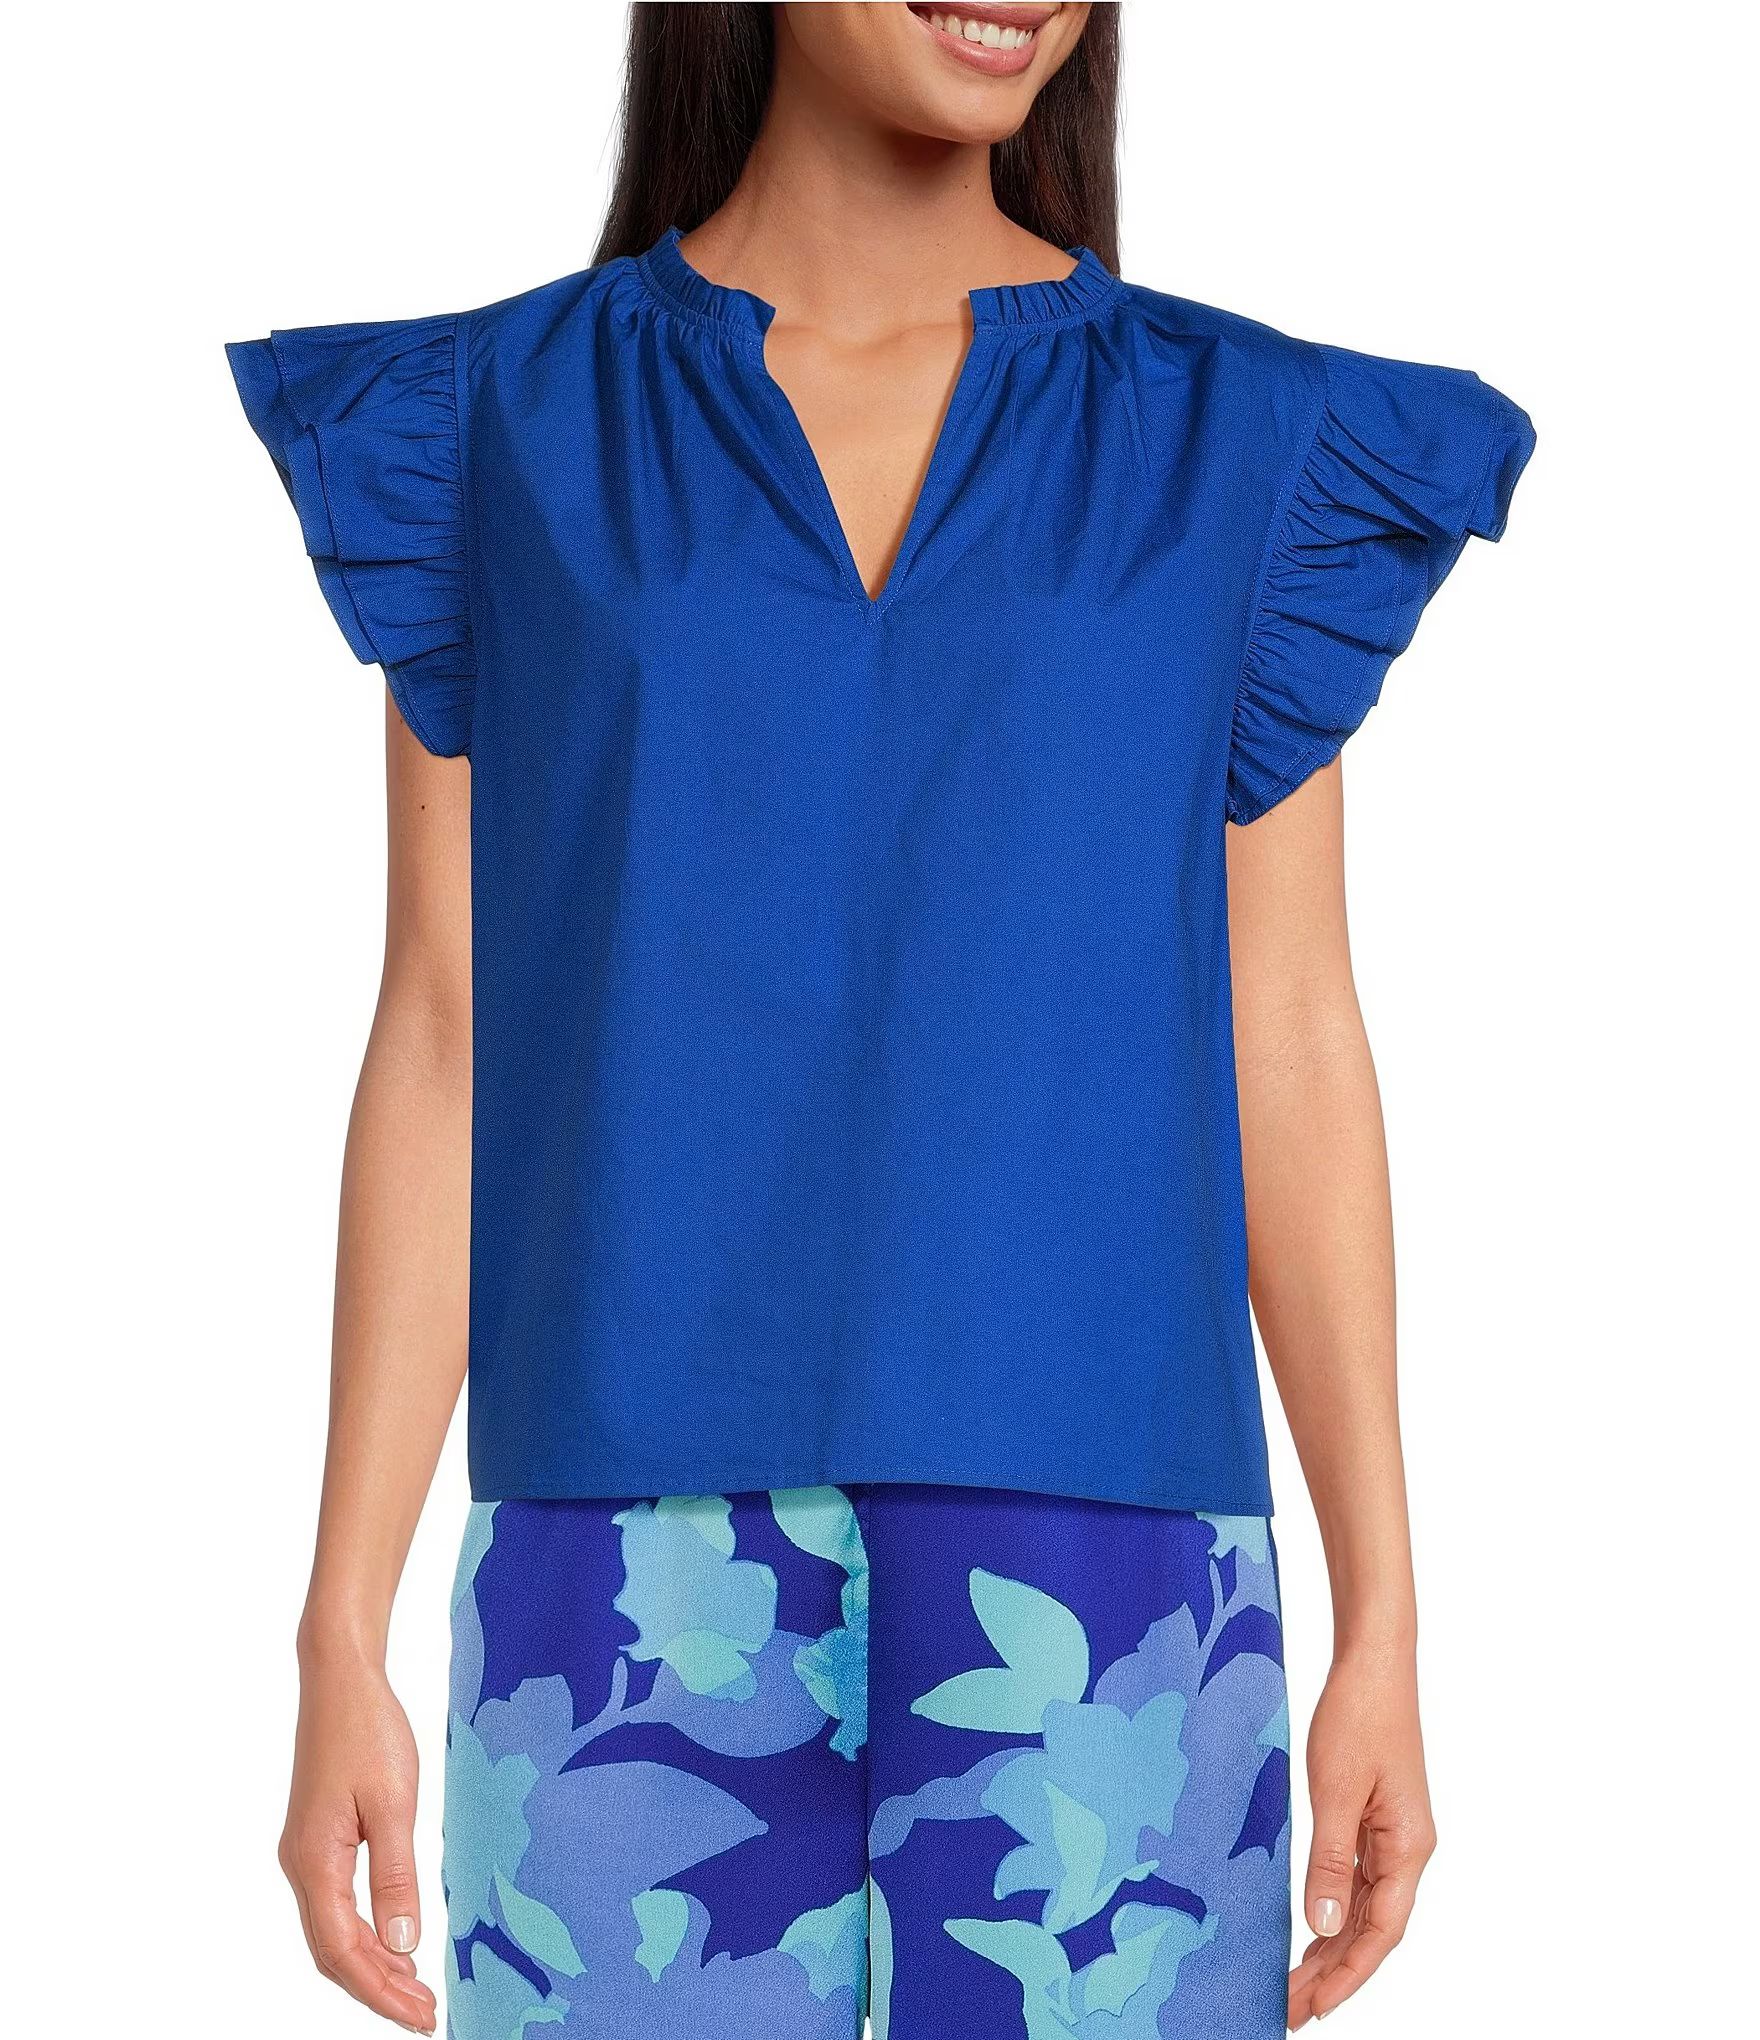 SugarlipsRisette Cotton V-Neck Ruffle Cap Sleeve TopPermanently ReducedOrig. $64.00Now $38.40Rate... | Dillard's